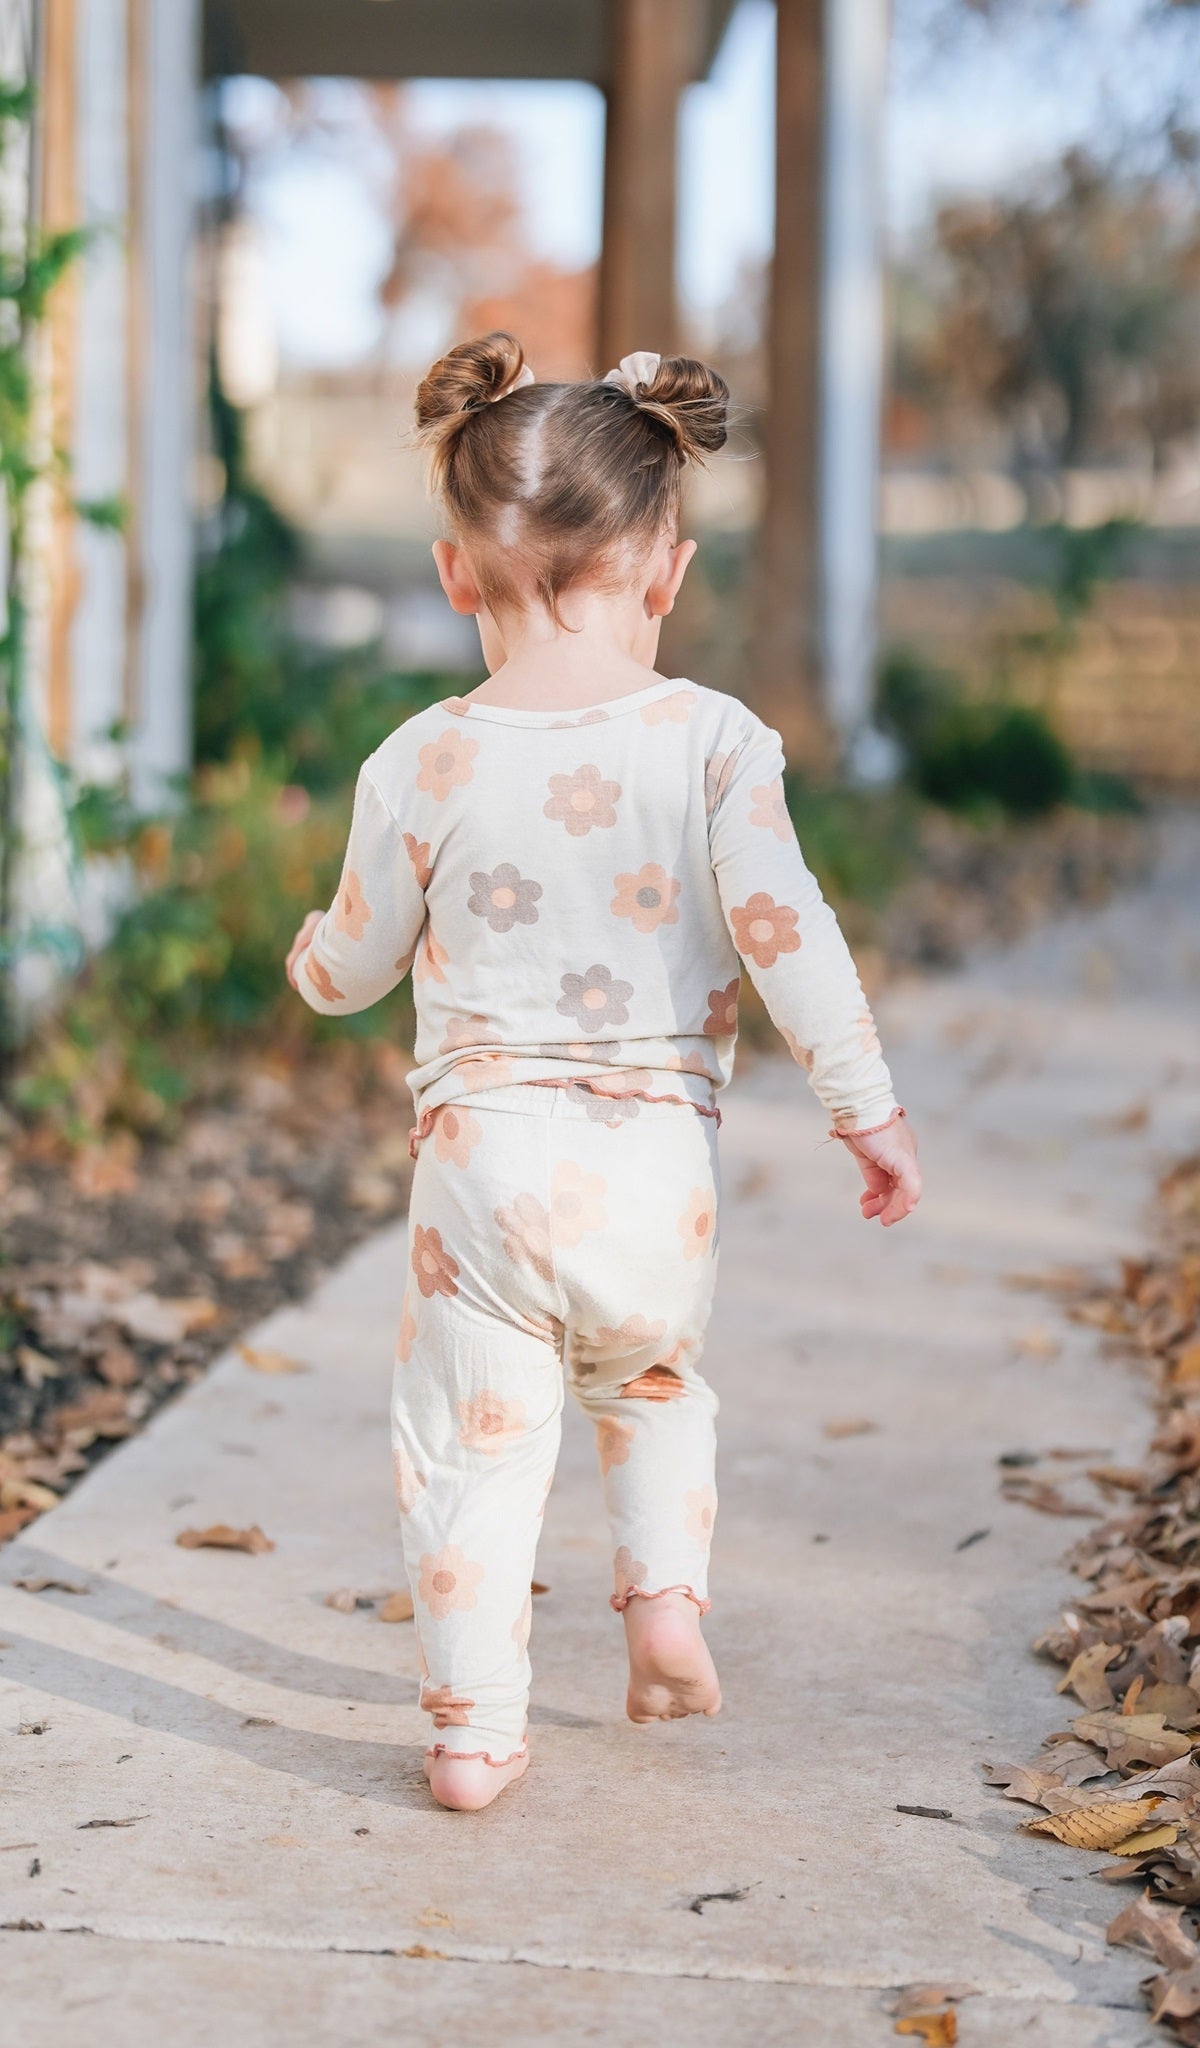 Daisies Charlie Baby 3-Piece Pant PJ worn by little girl running barefoot.